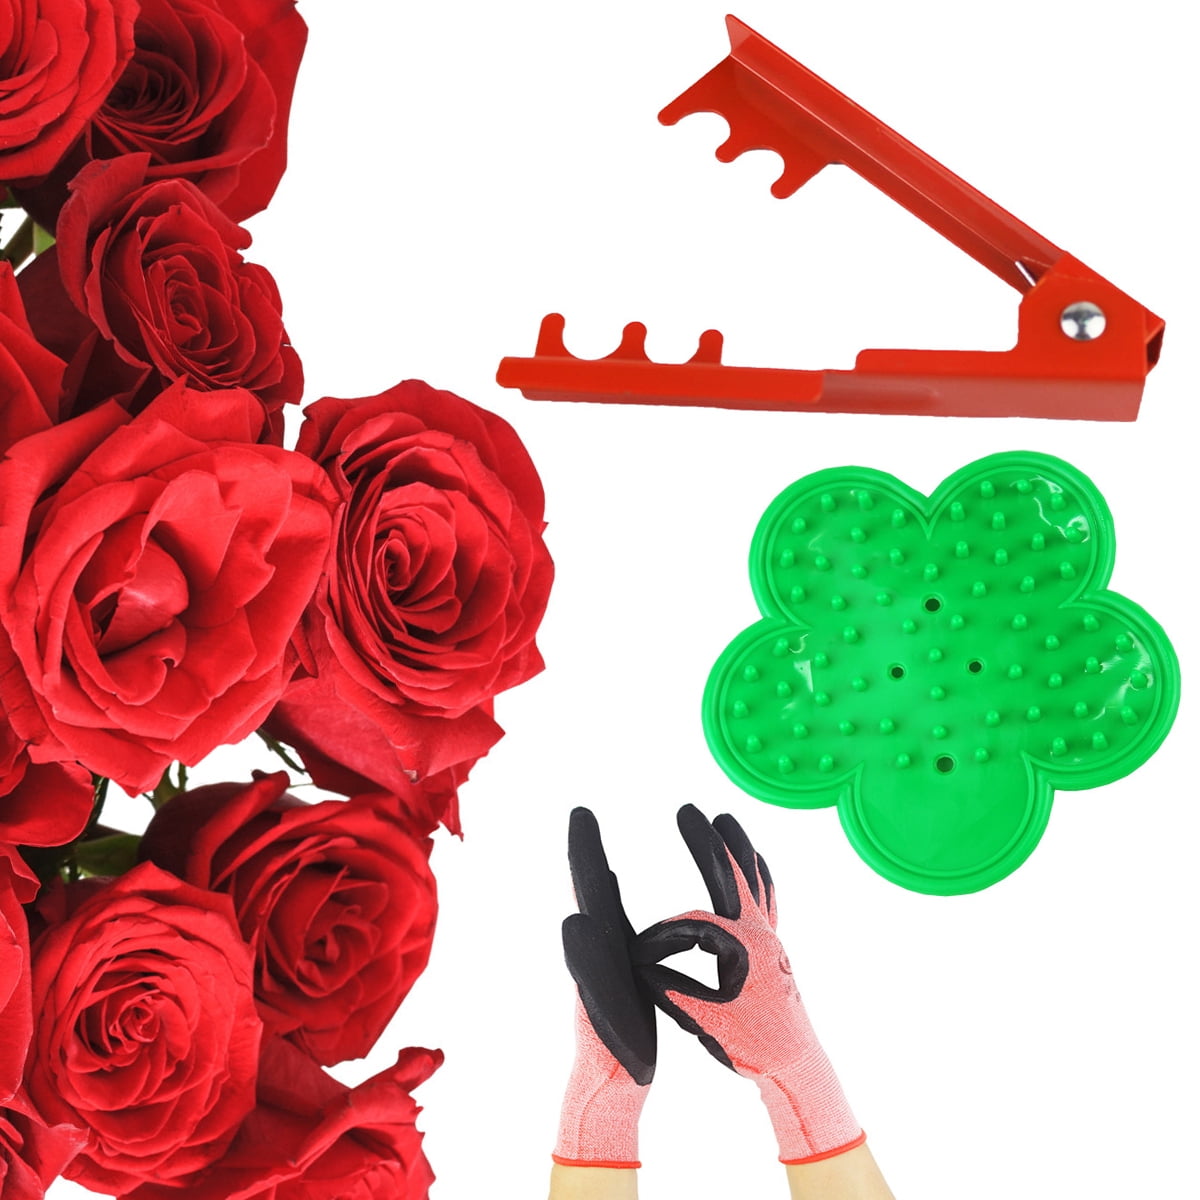 Metal Thorn Remover Kit Rose Leaf Stem Stripper Floristry Garden Stripping  Tool with Plastic Hand Tool for Roses & Garden 1 Red Clip & 1 Green Pad